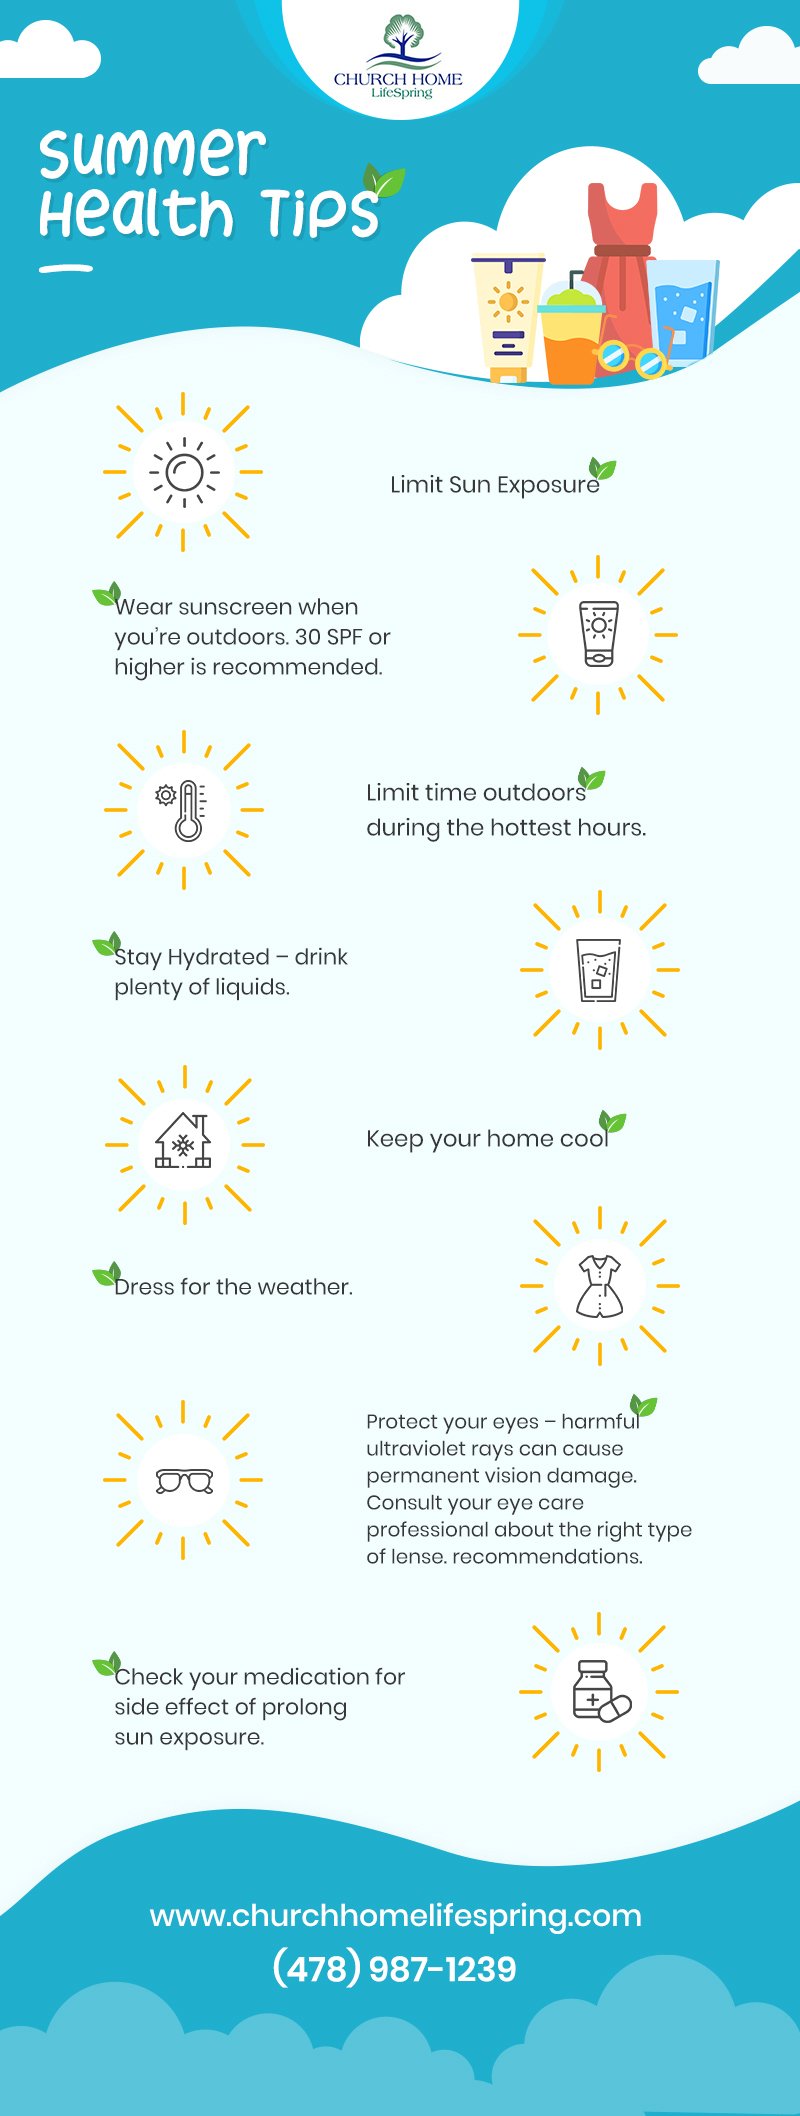 Church_Home_Infographic_Summer Tips